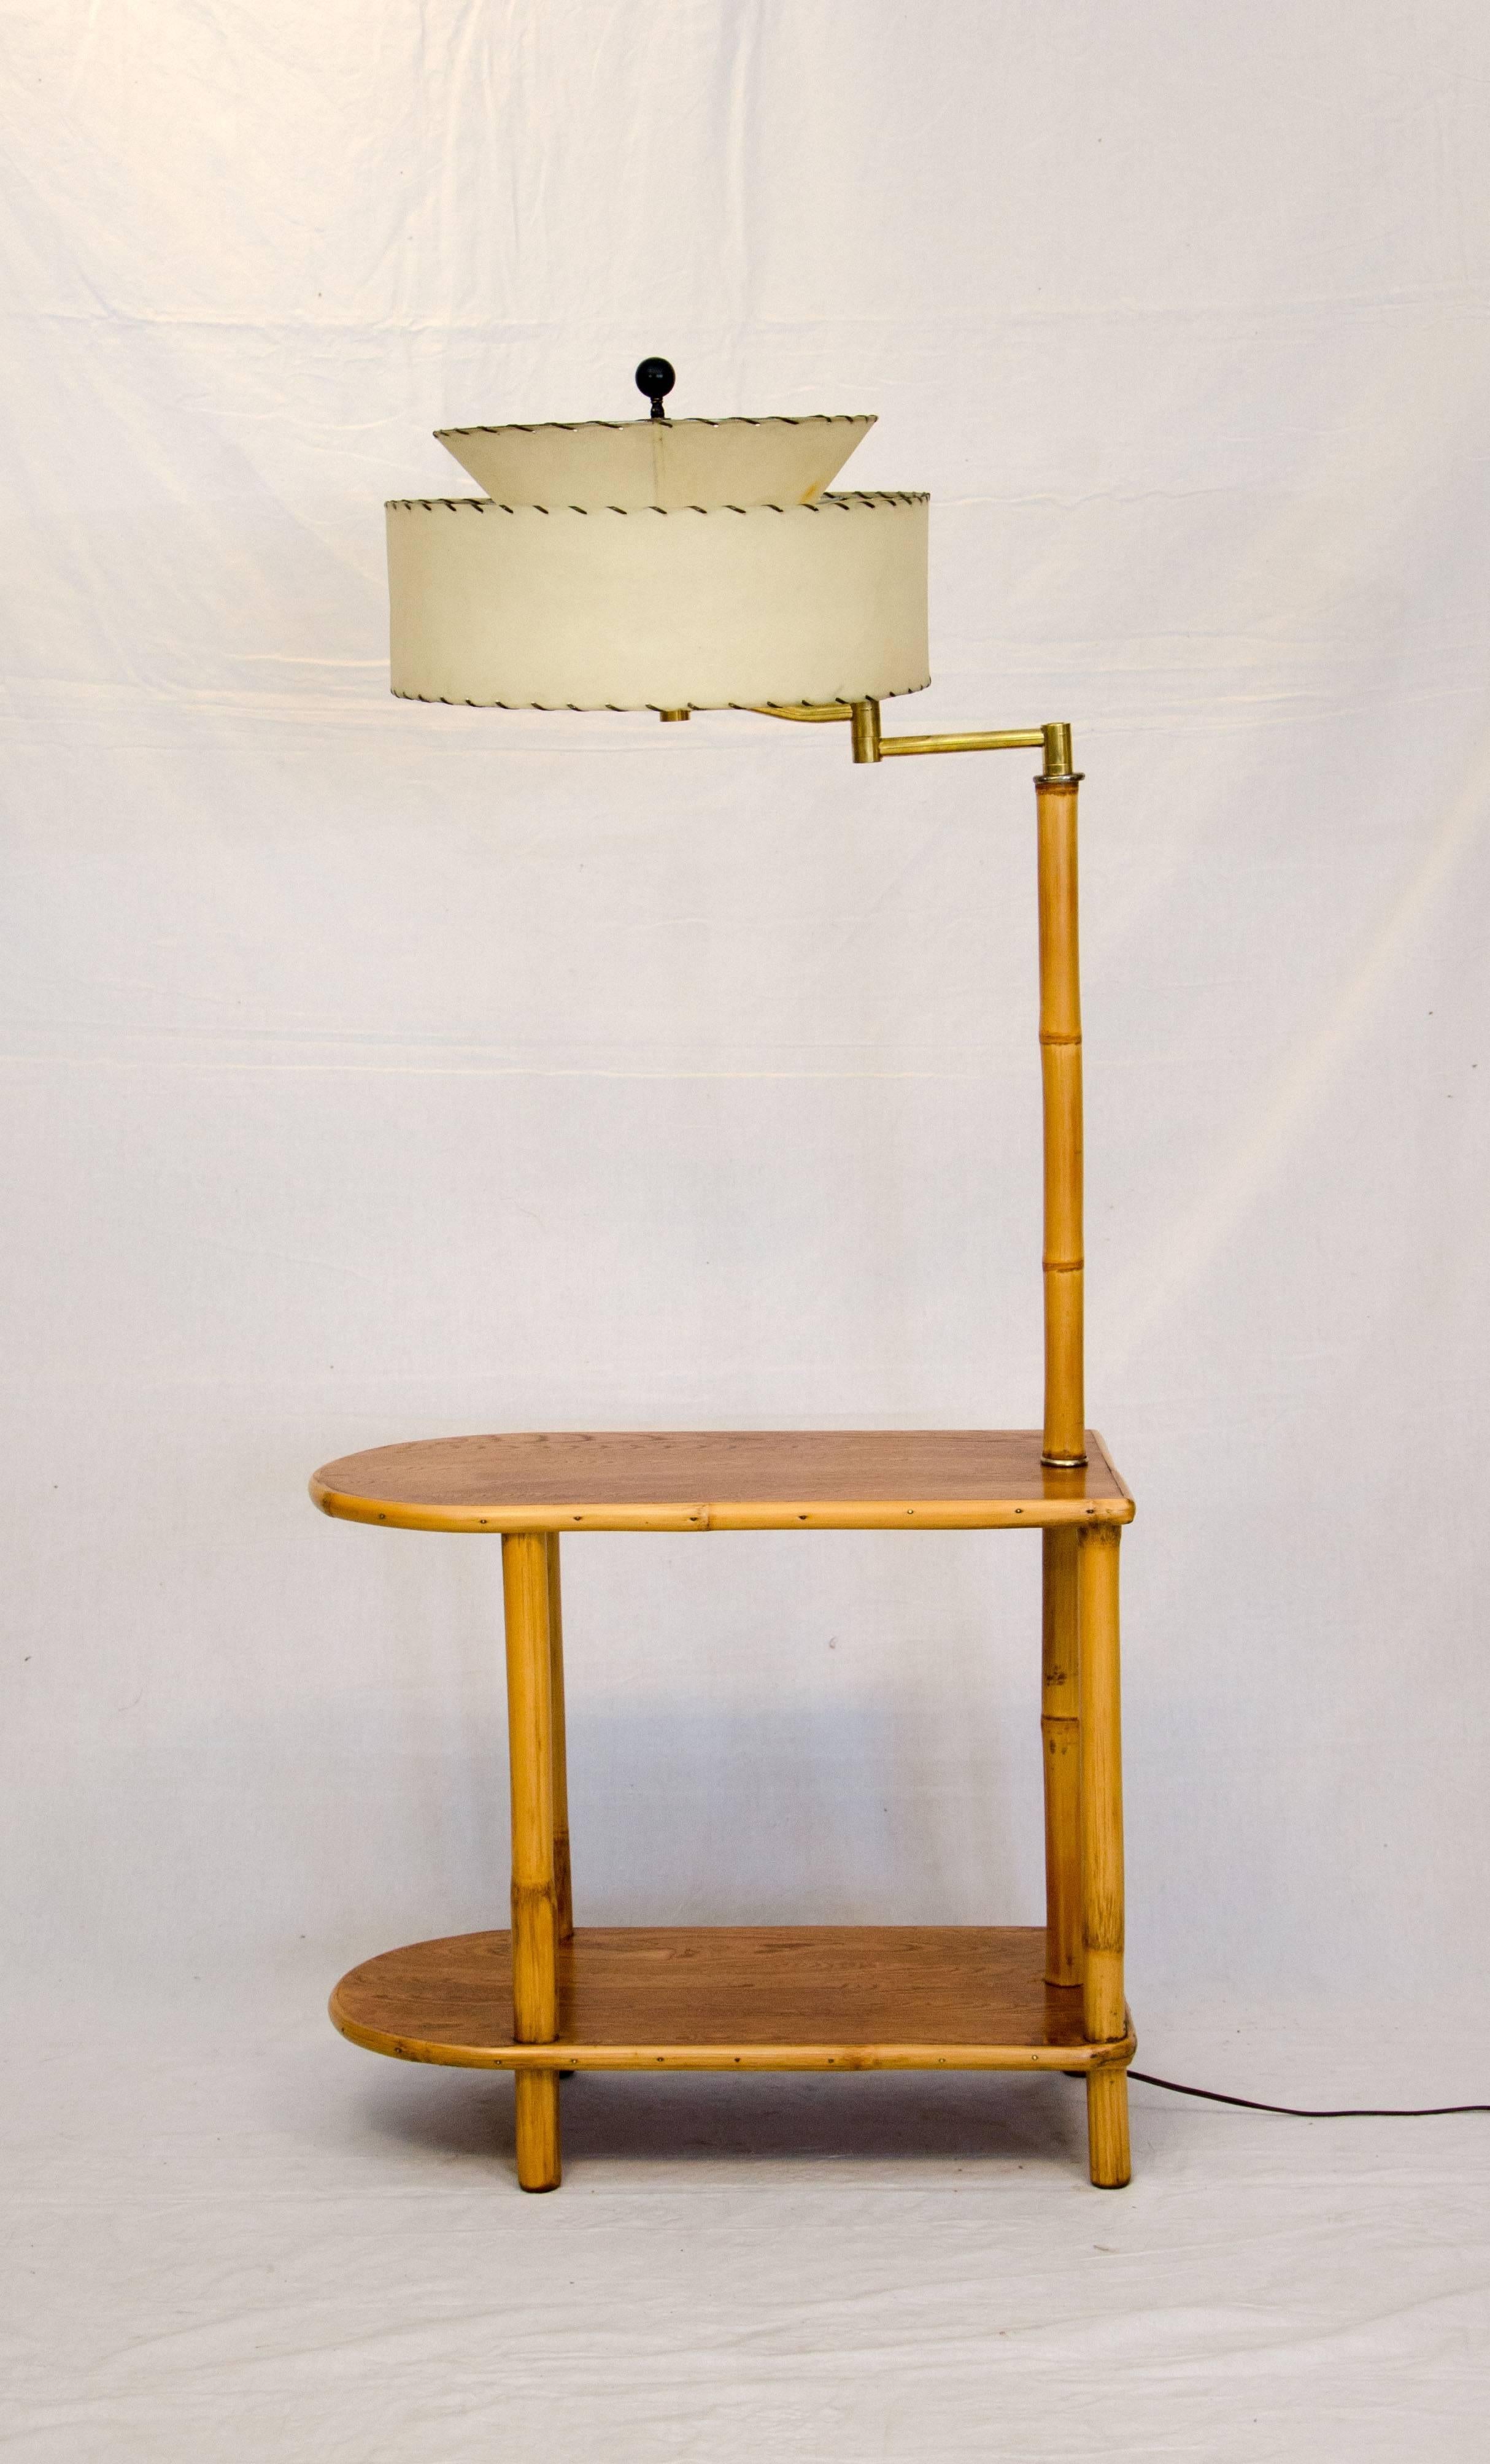 Rattan two-tiered end table with attached lamp and vintage shade. The lamp can be adjusted from side to side if used for reading. Lower tier would store books or magazines.